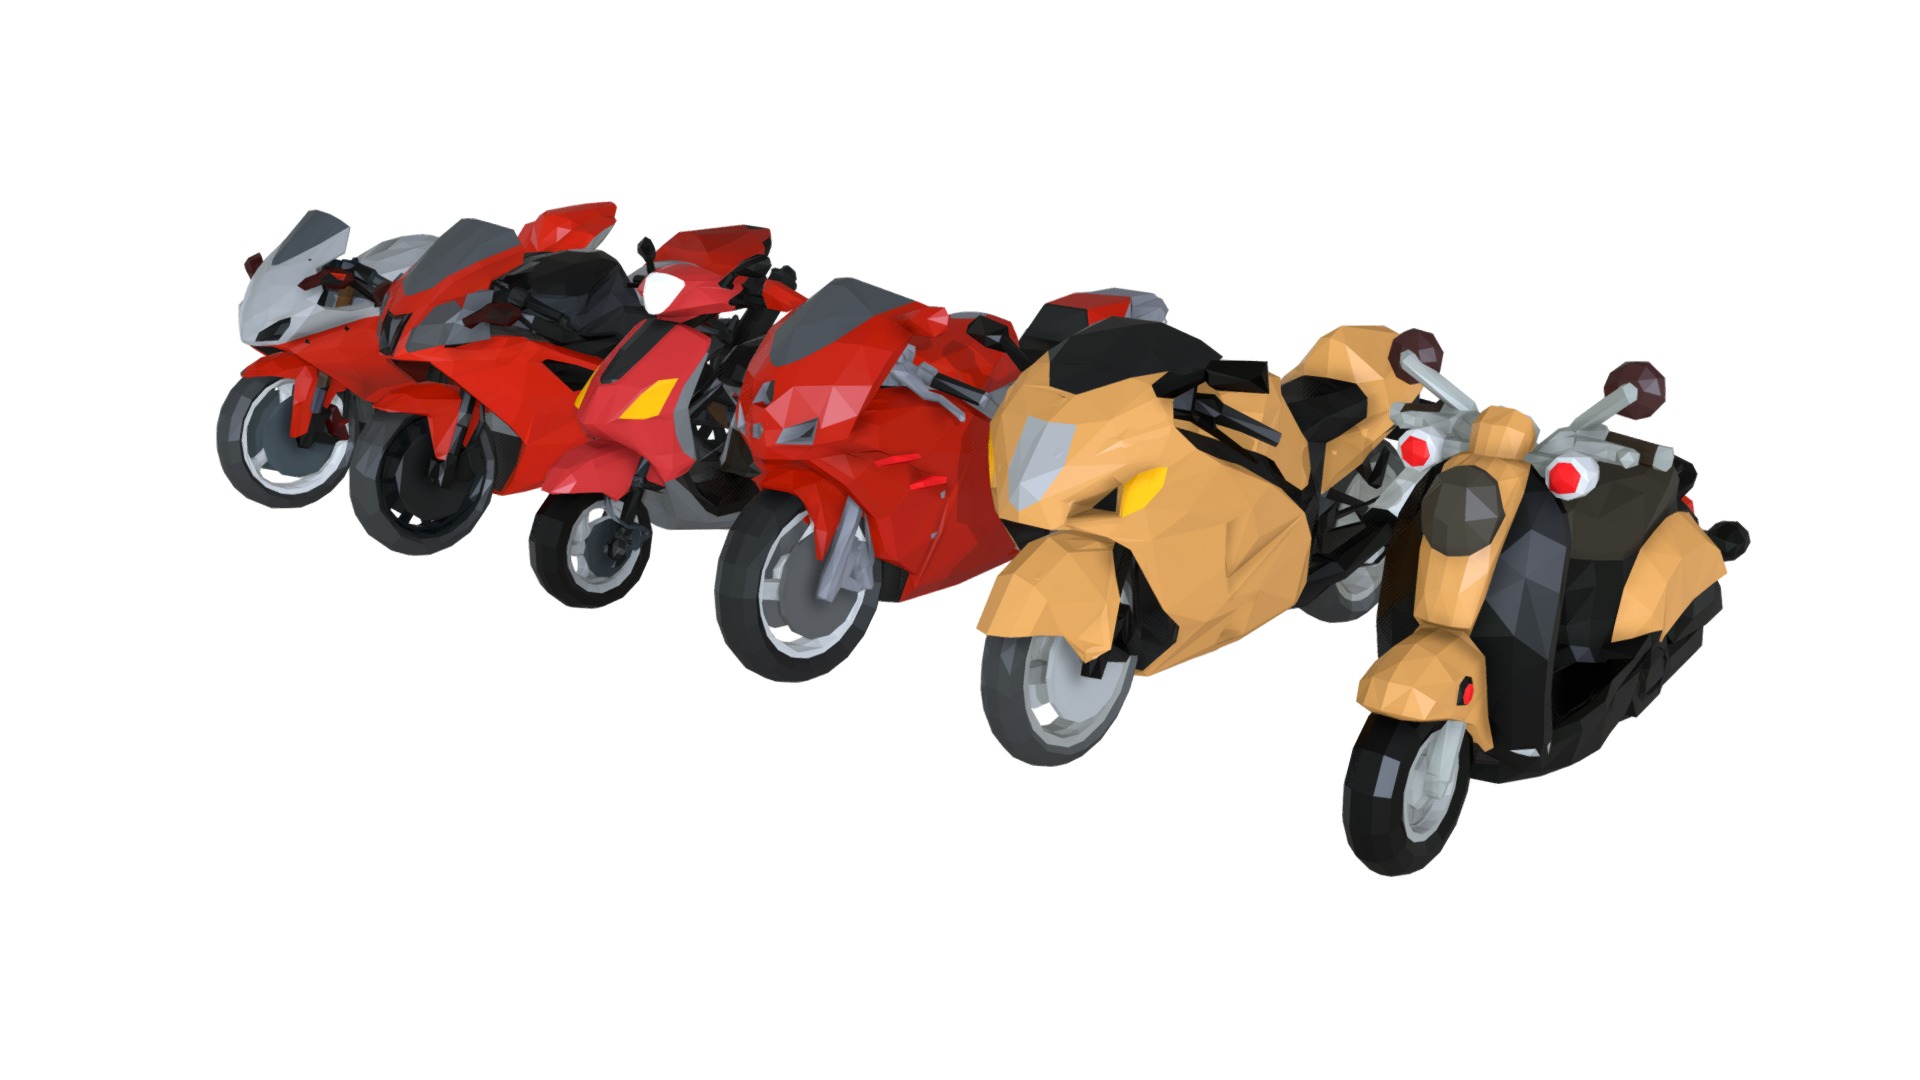 3D model Low poly Art Vehicle Motor Pack 200317 - This is a 3D model of the Low poly Art Vehicle Motor Pack 200317. The 3D model is about a group of toy vehicles.